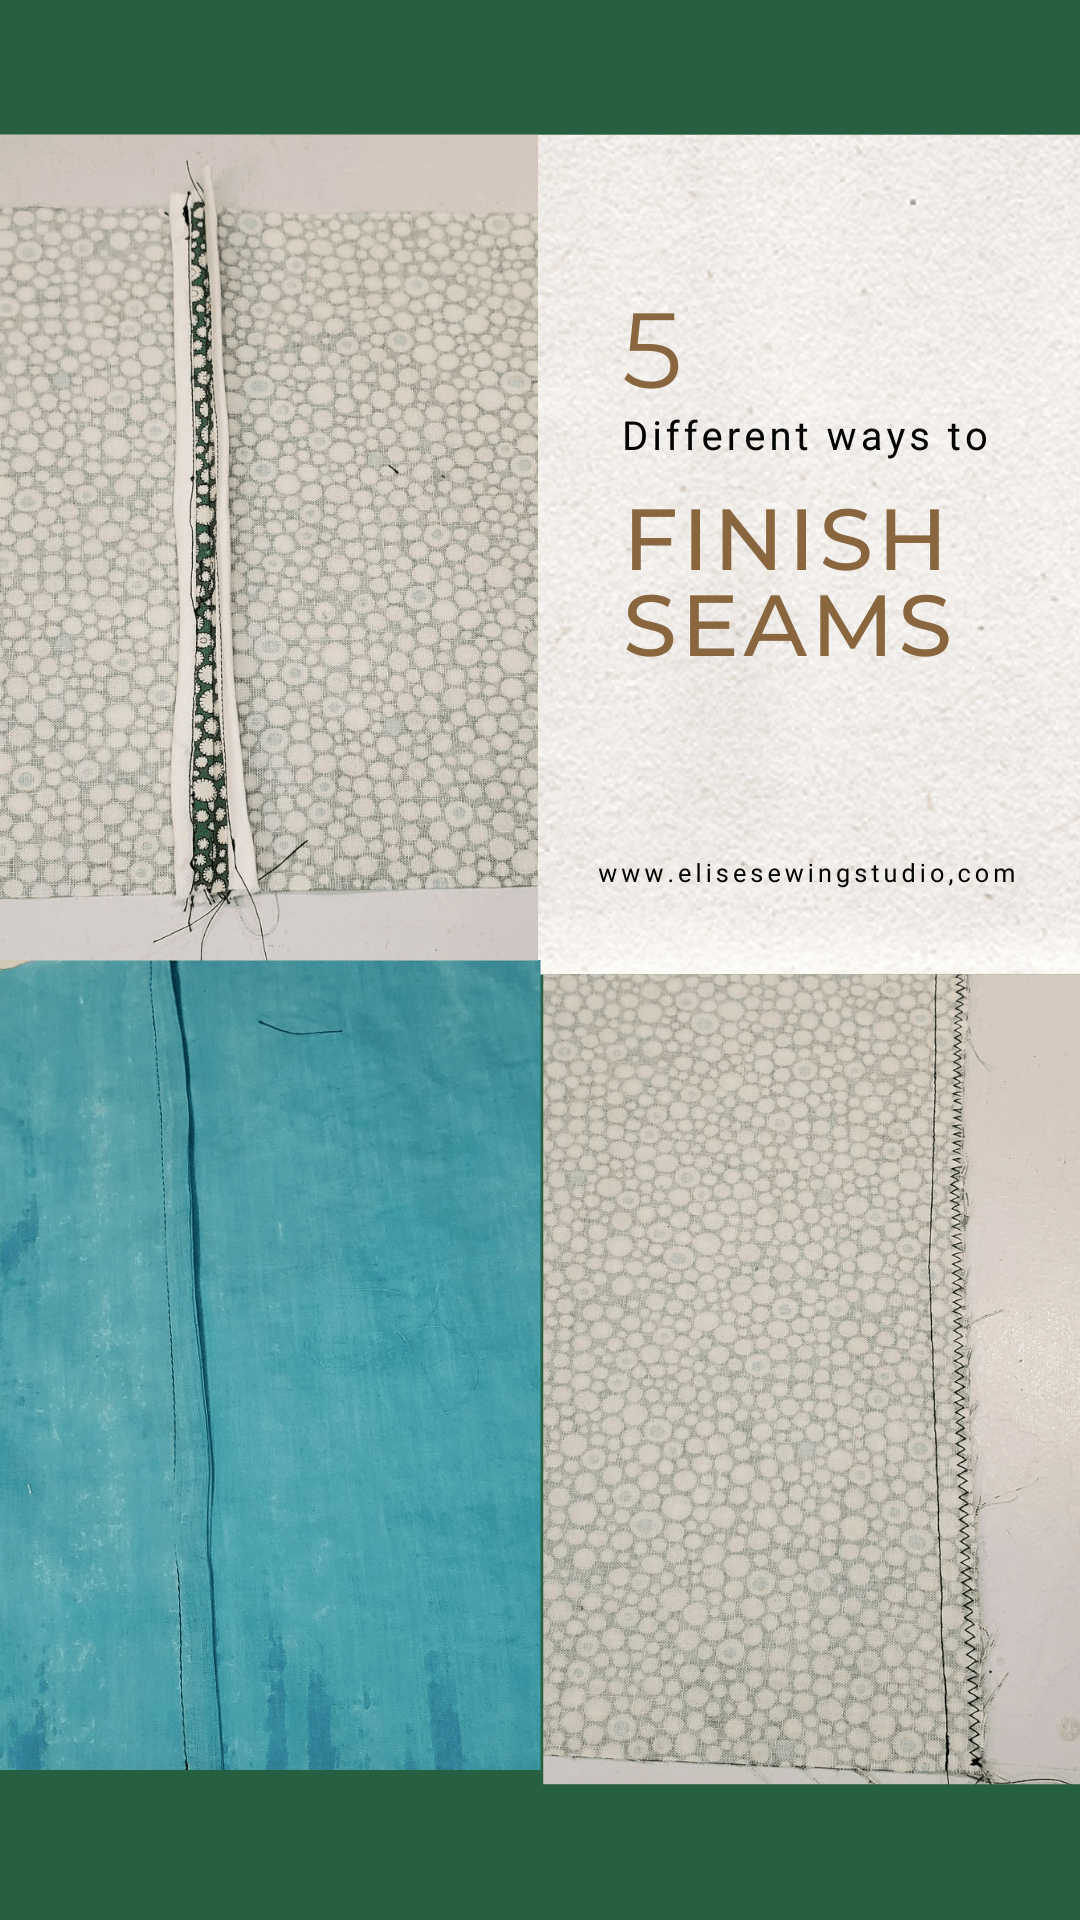 How to finish seams